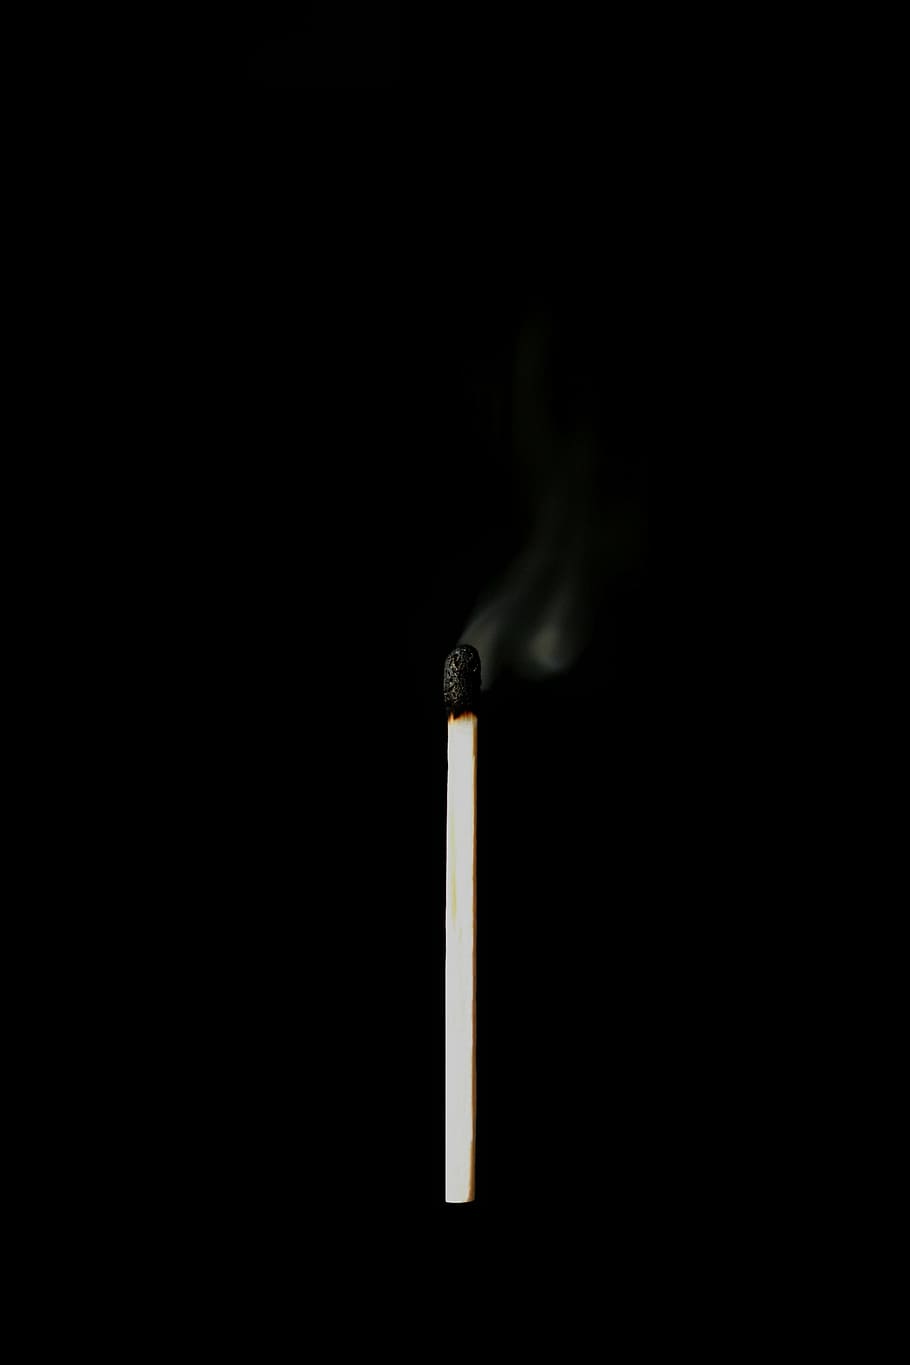 lighted match stick, match, matches, sticks, lighter, wood, sulfur, black, used, consumes